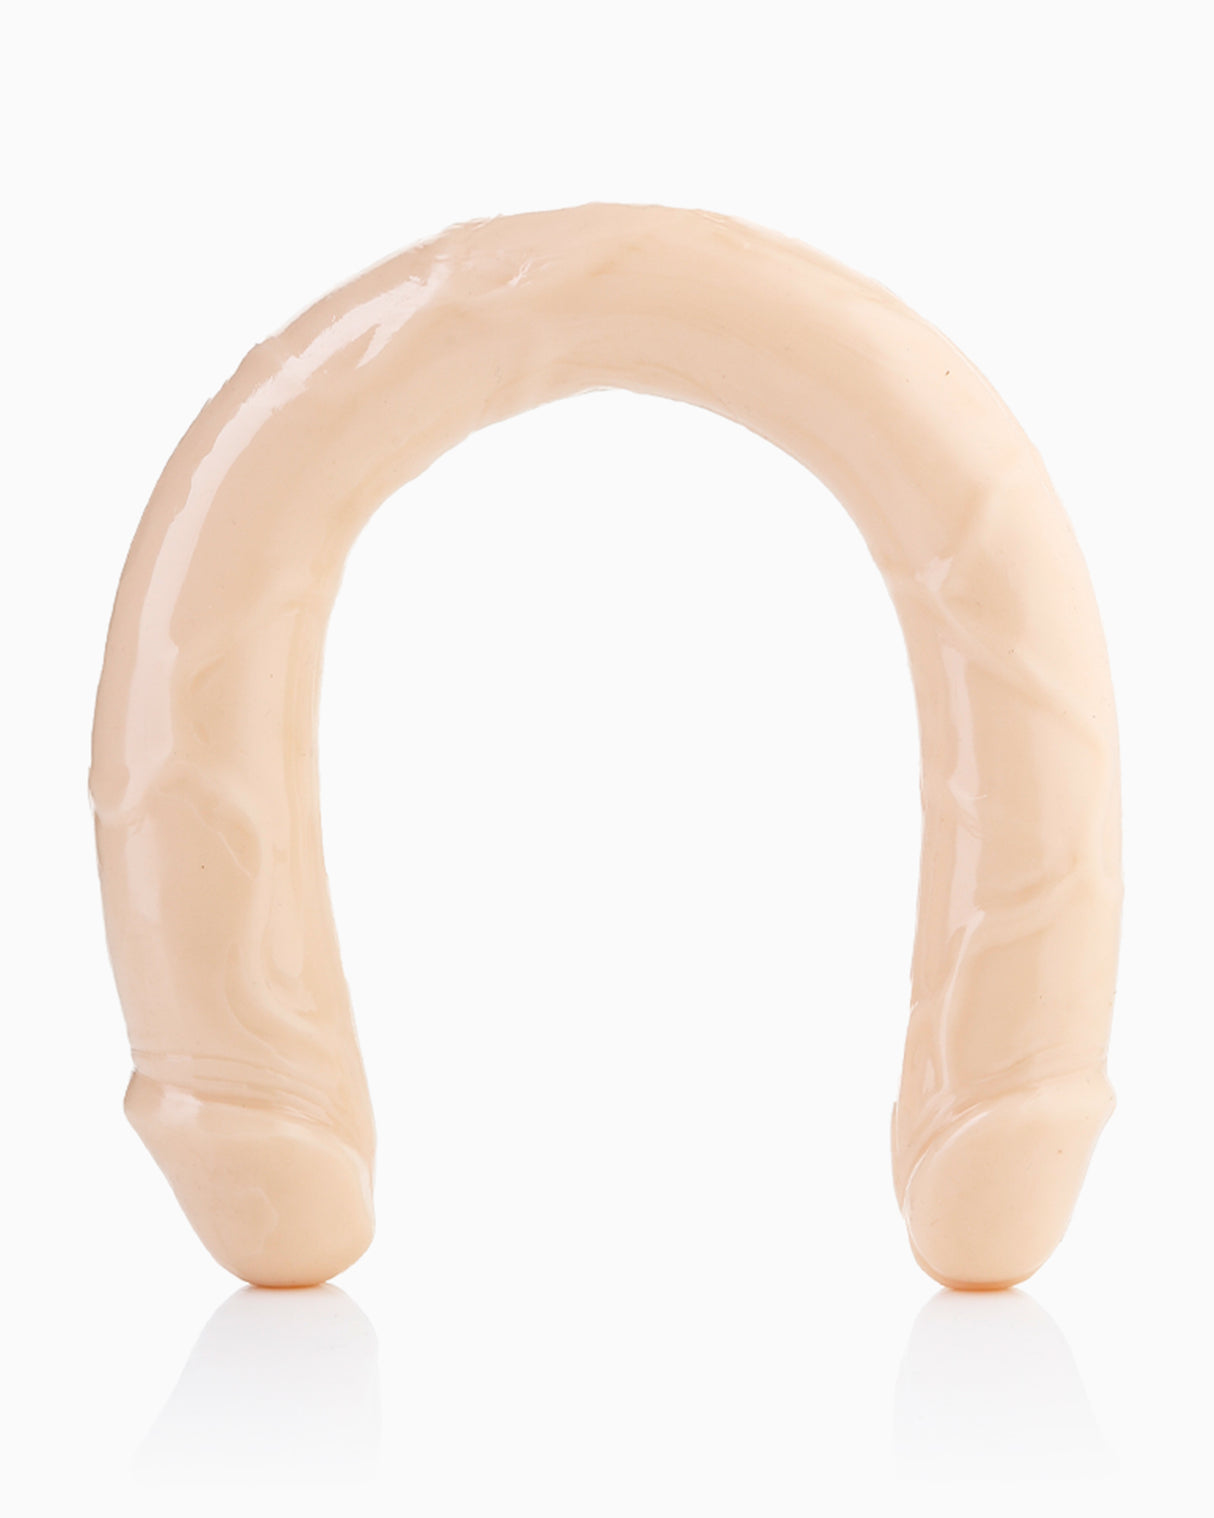 Pillow Talk Ultimate Double Ended Dildo, 15.5 Inches